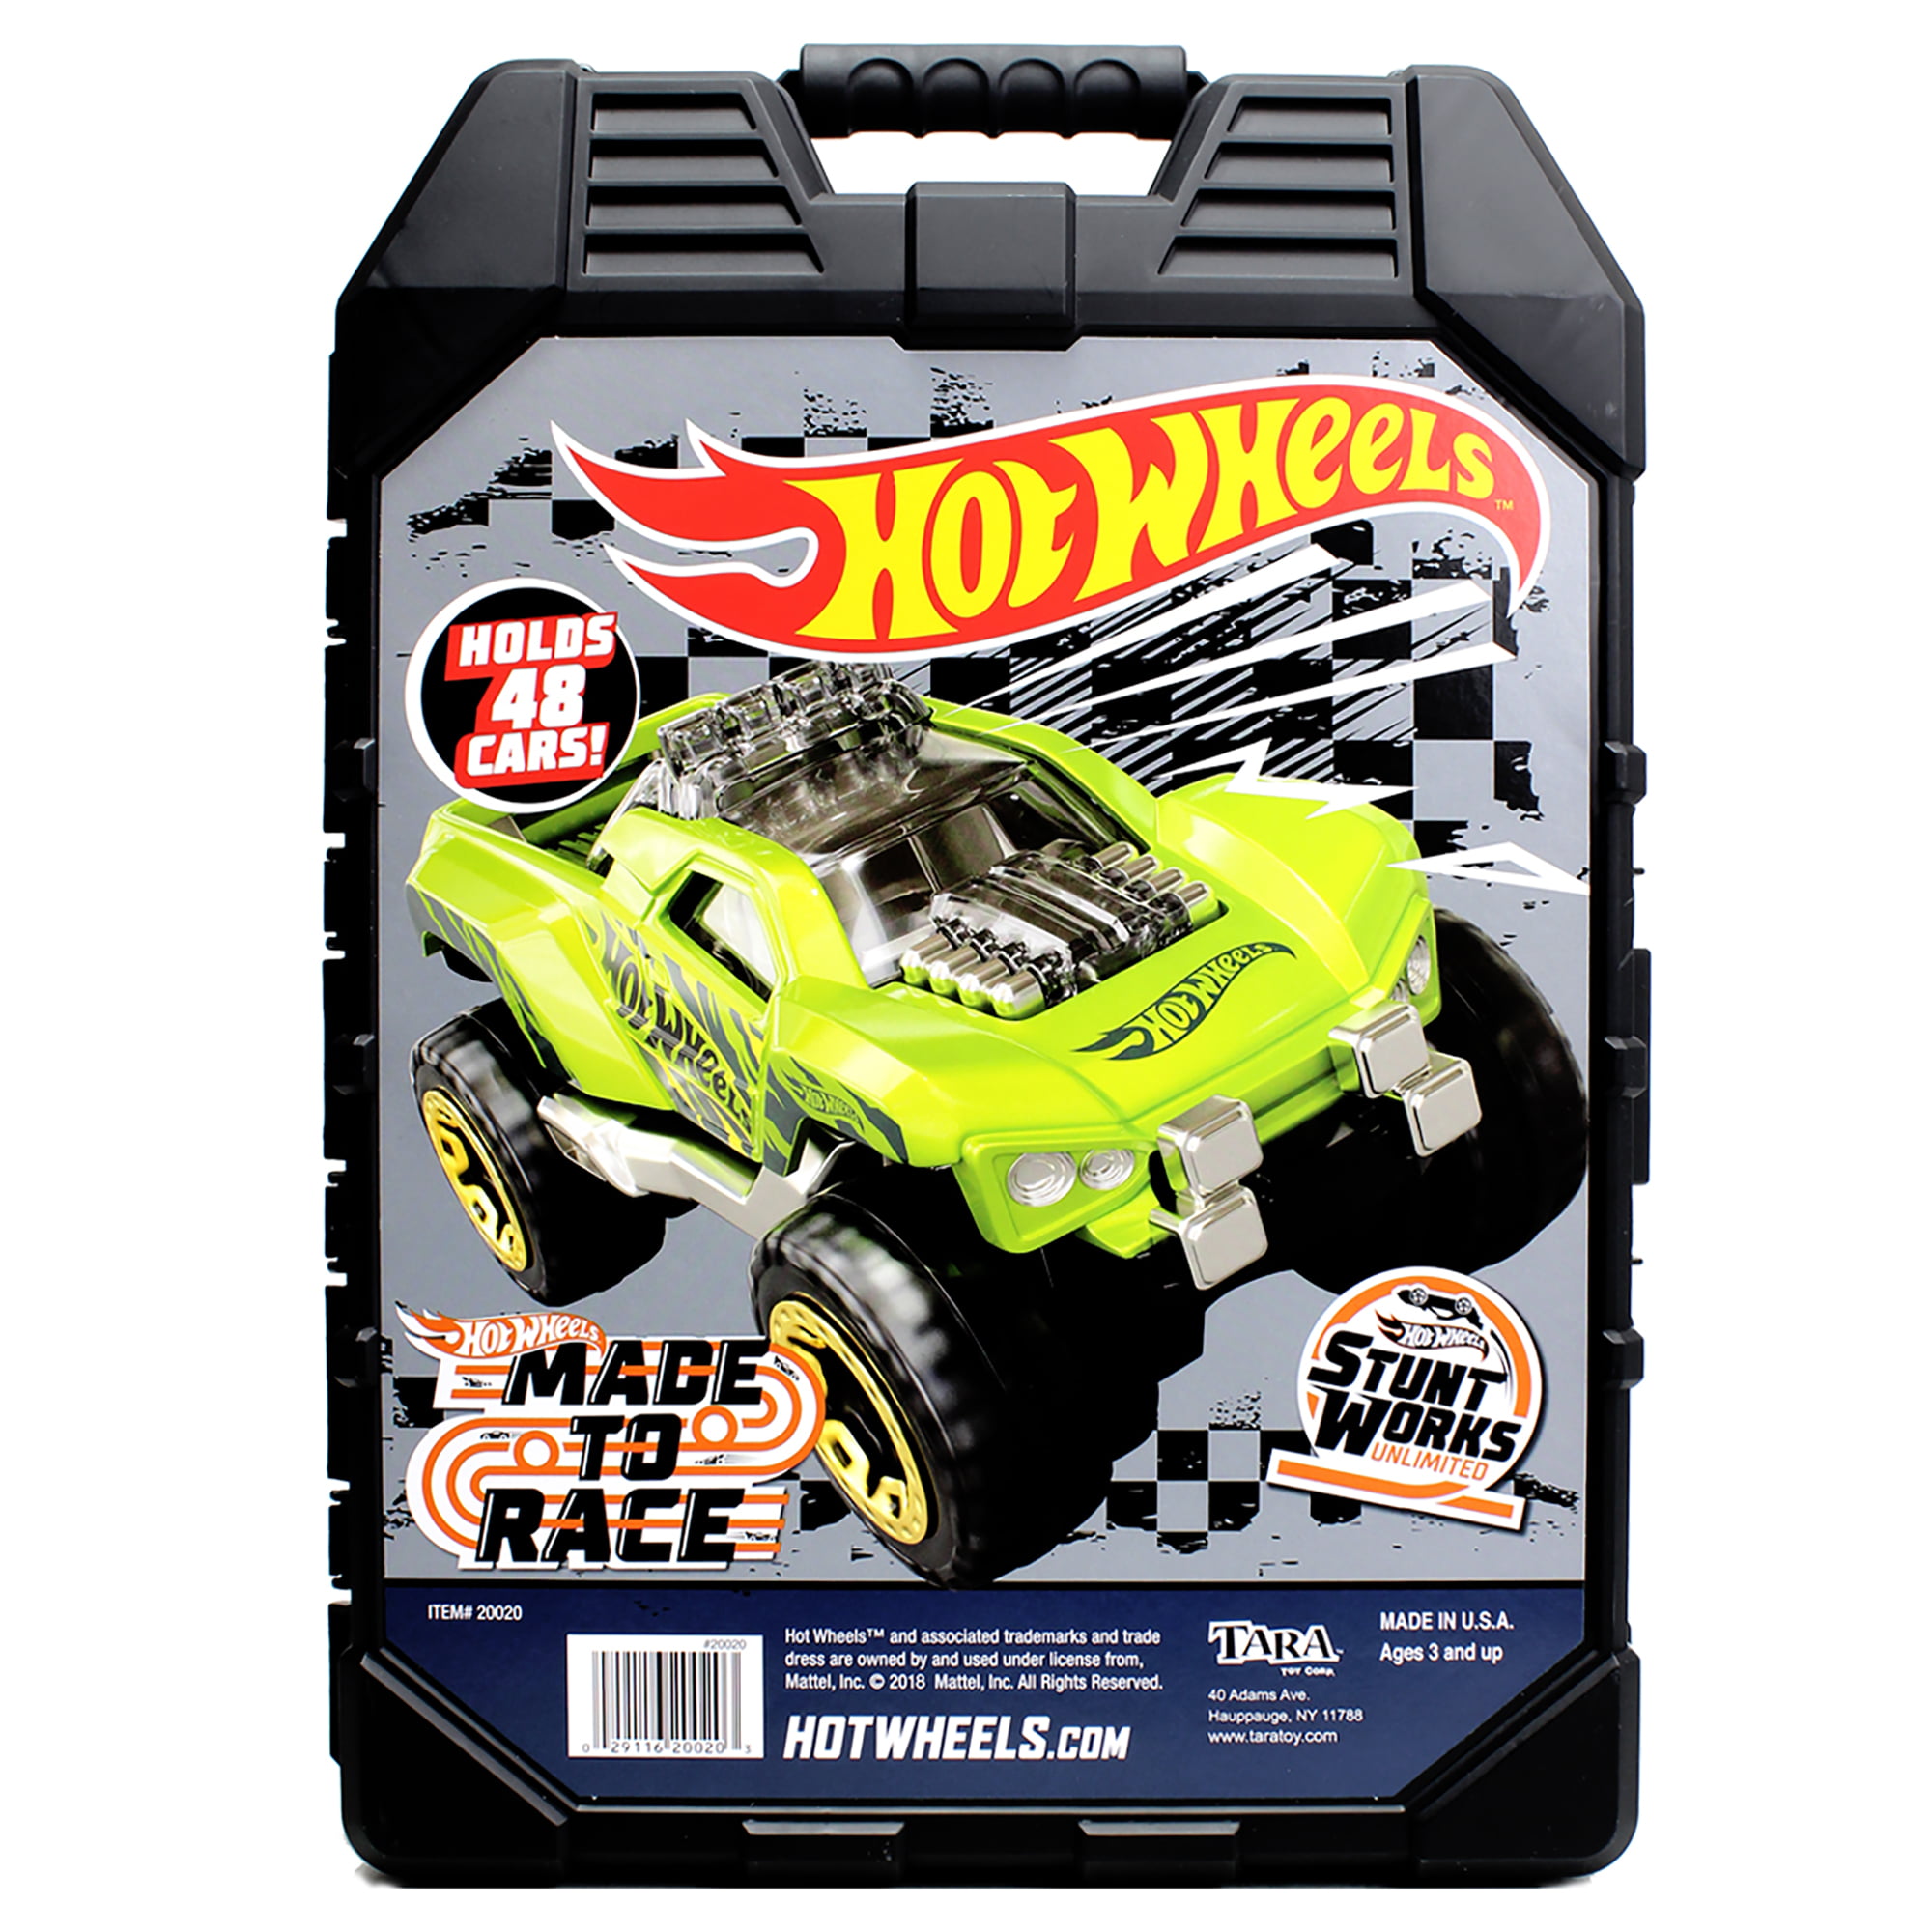 Hot Wheels 100 Cars with Carry Case Storage 20135 for sale online